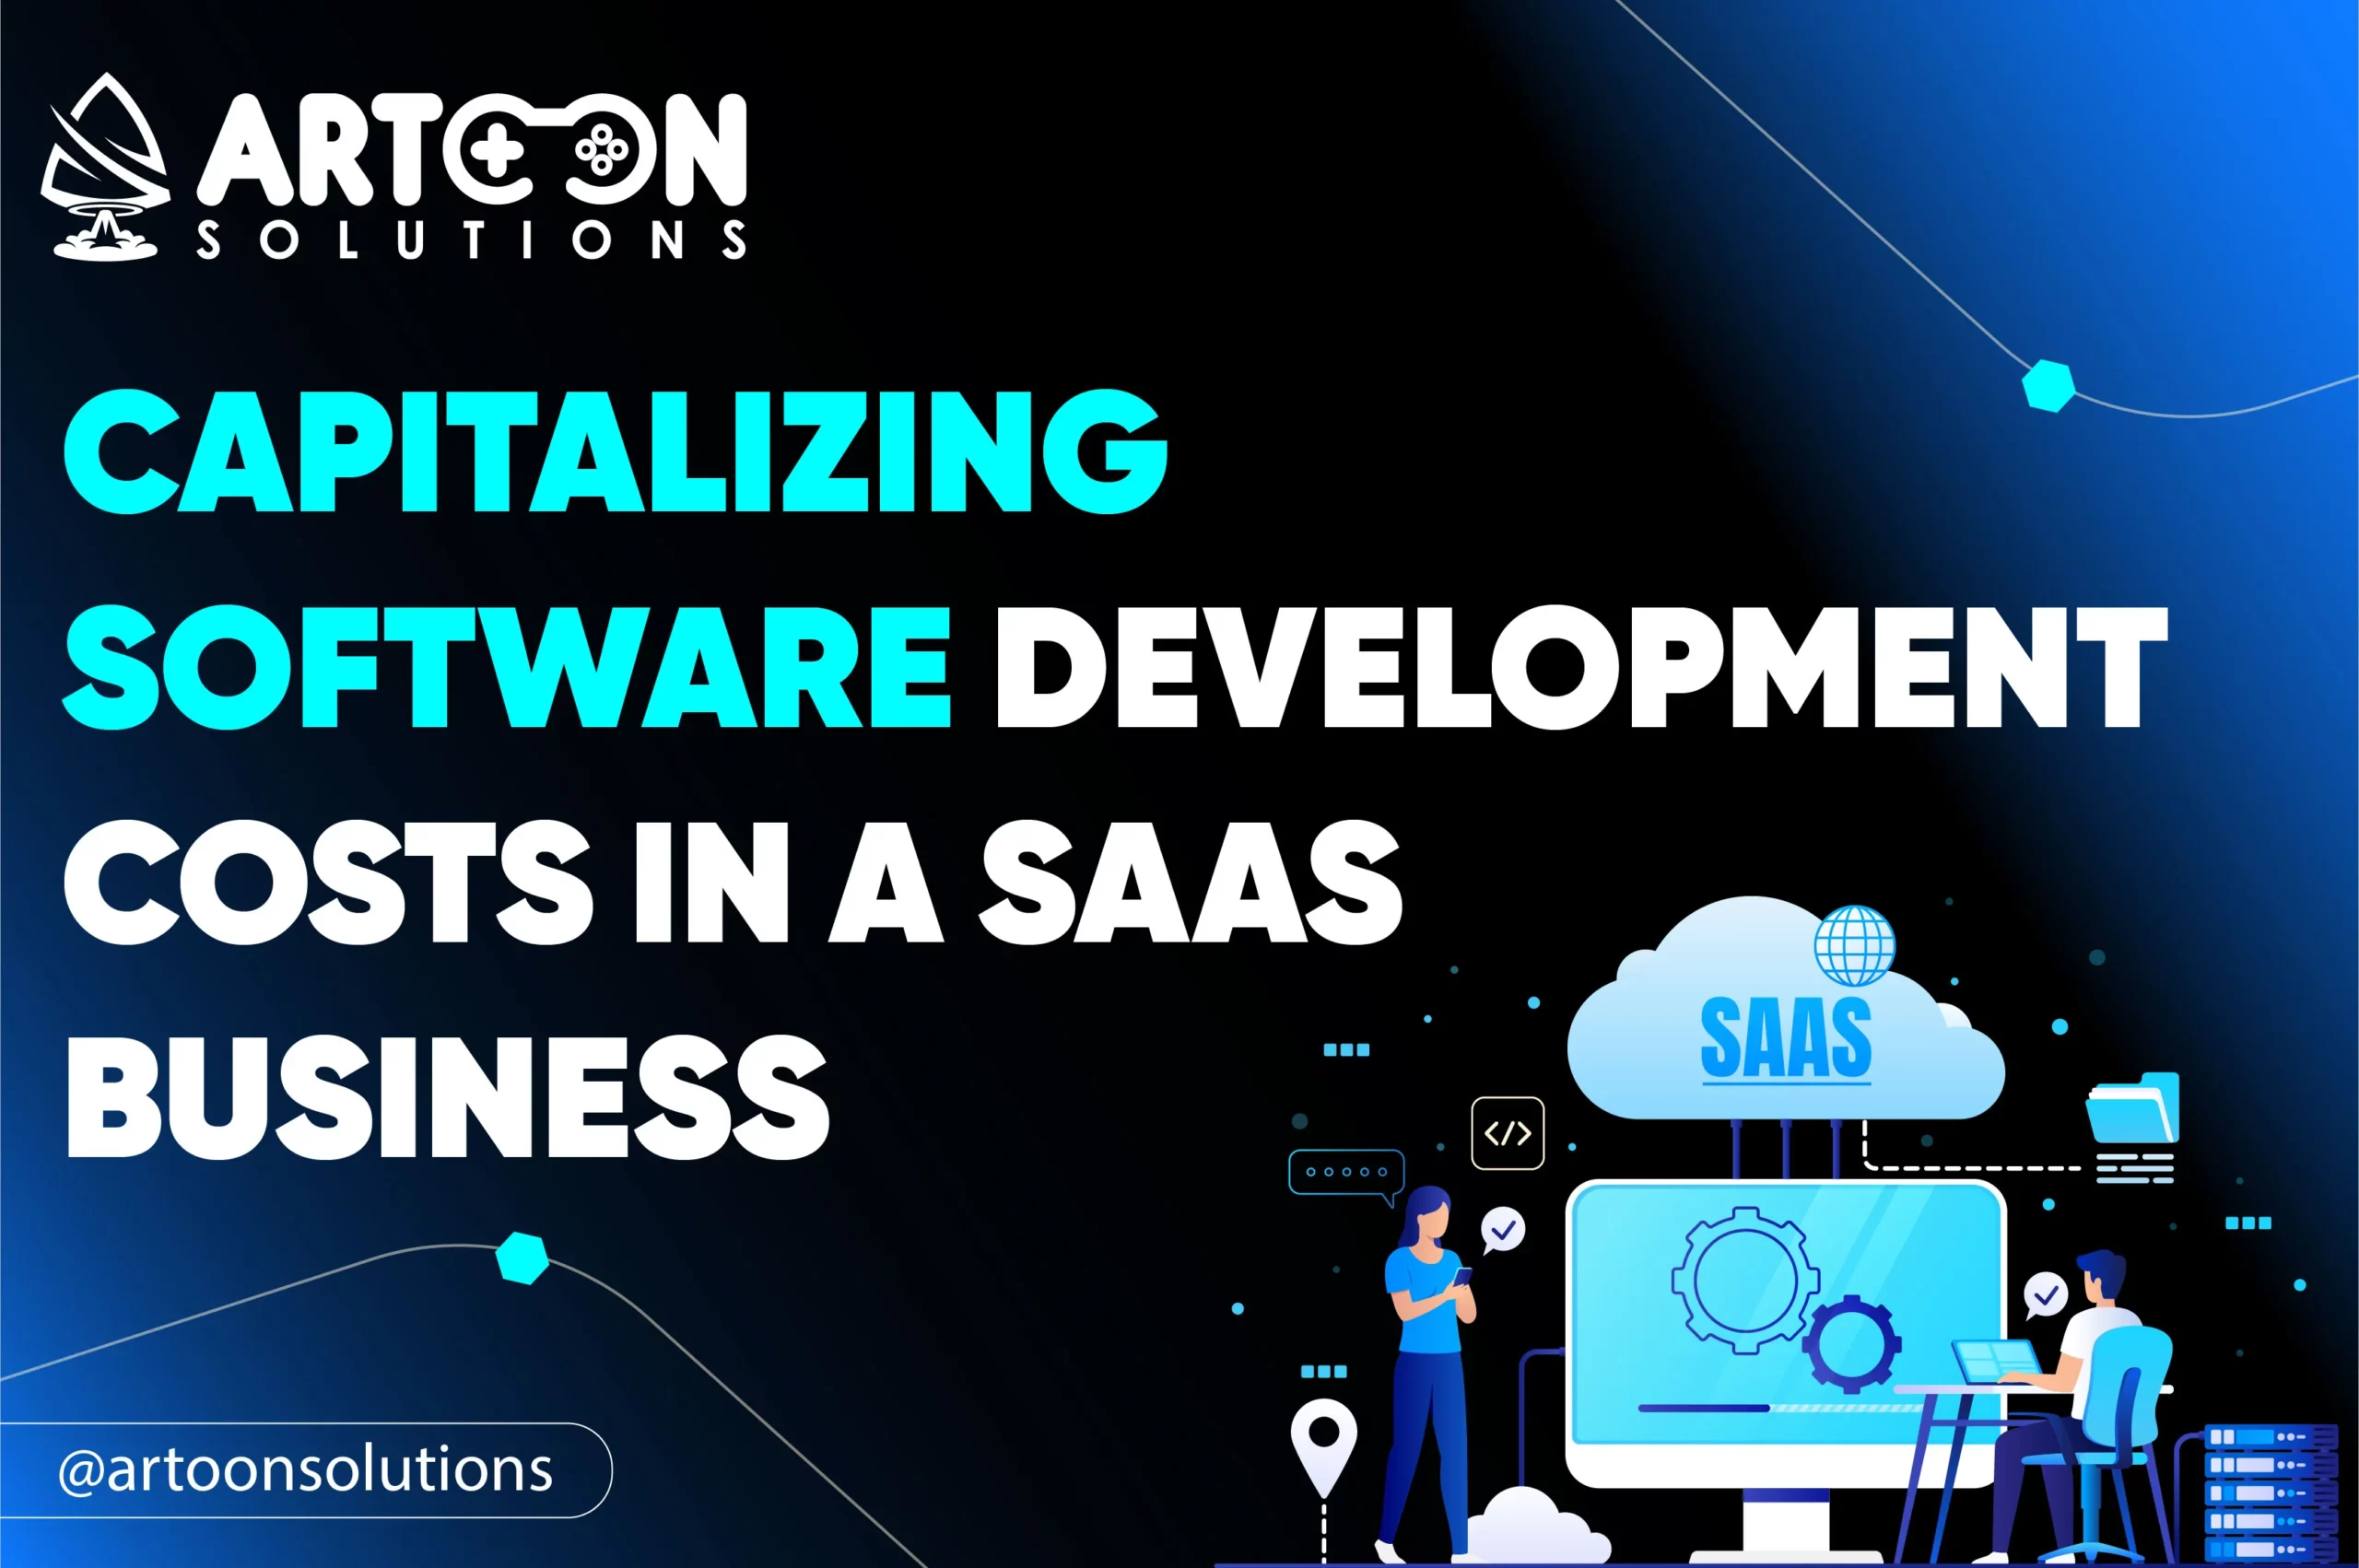 Capitalizing Software Development Costs in a SaaS Business